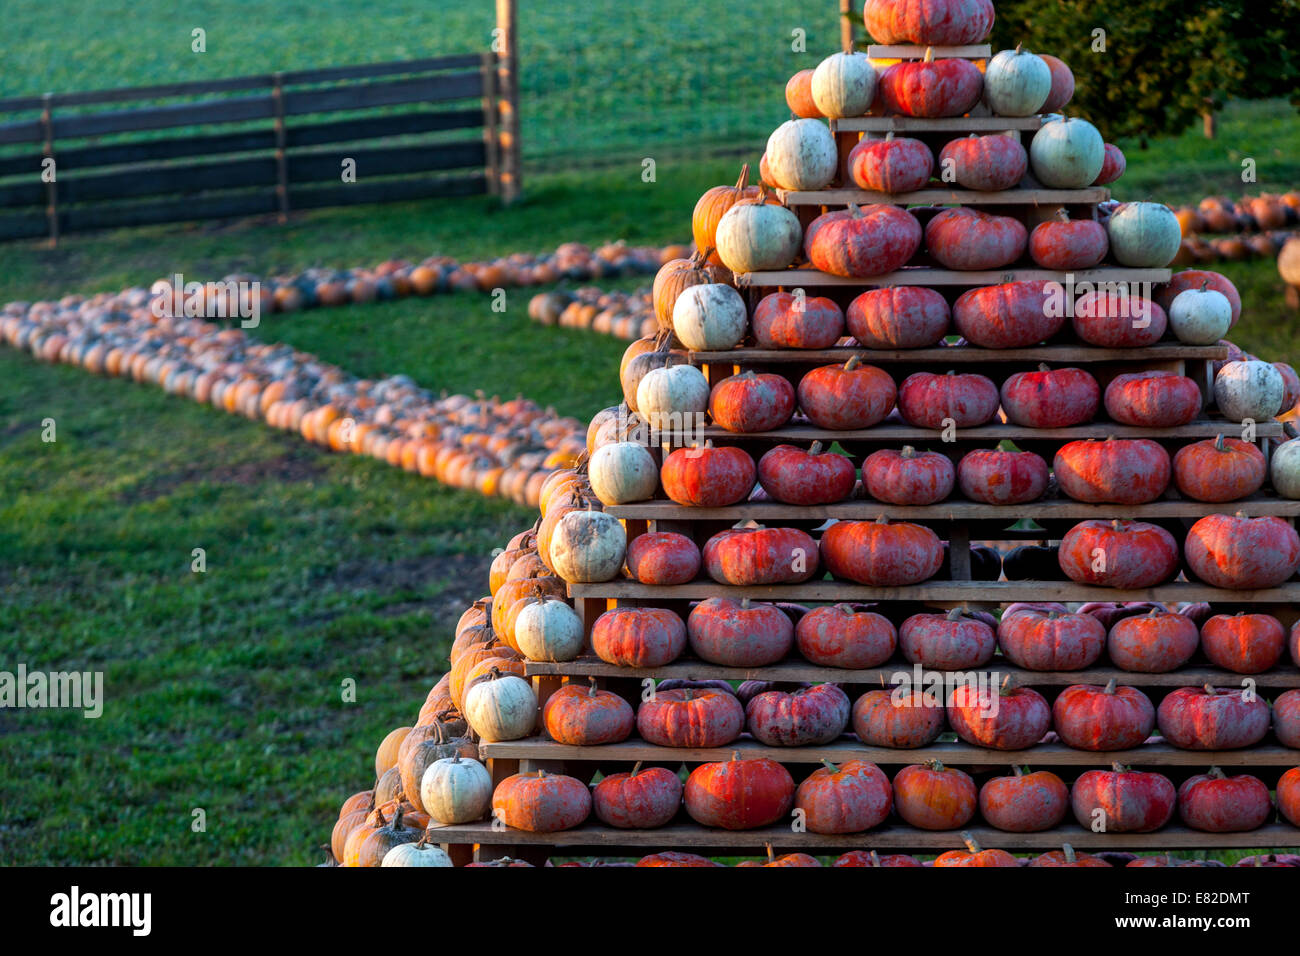 Pumpkins farm, pumpkins stacked up in the shape of a pyramid Stock Photo